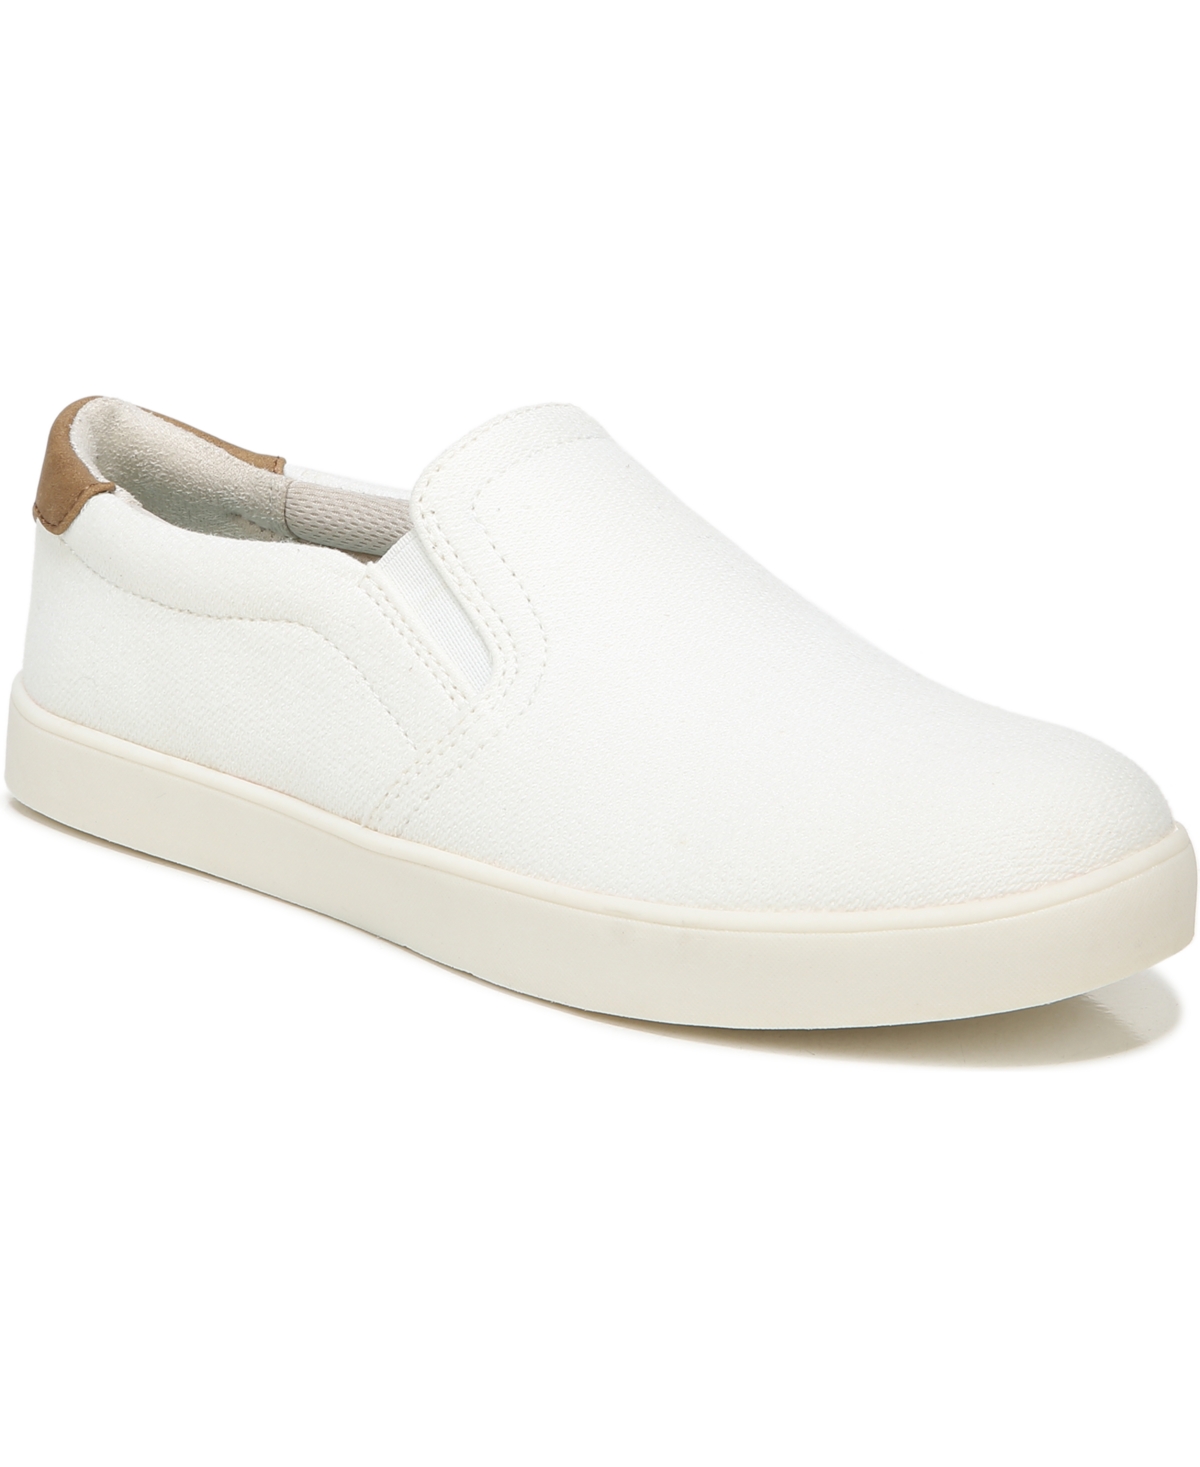 Dr. Scholl's Women's Madison Slip-on Sneakers In White Fabric